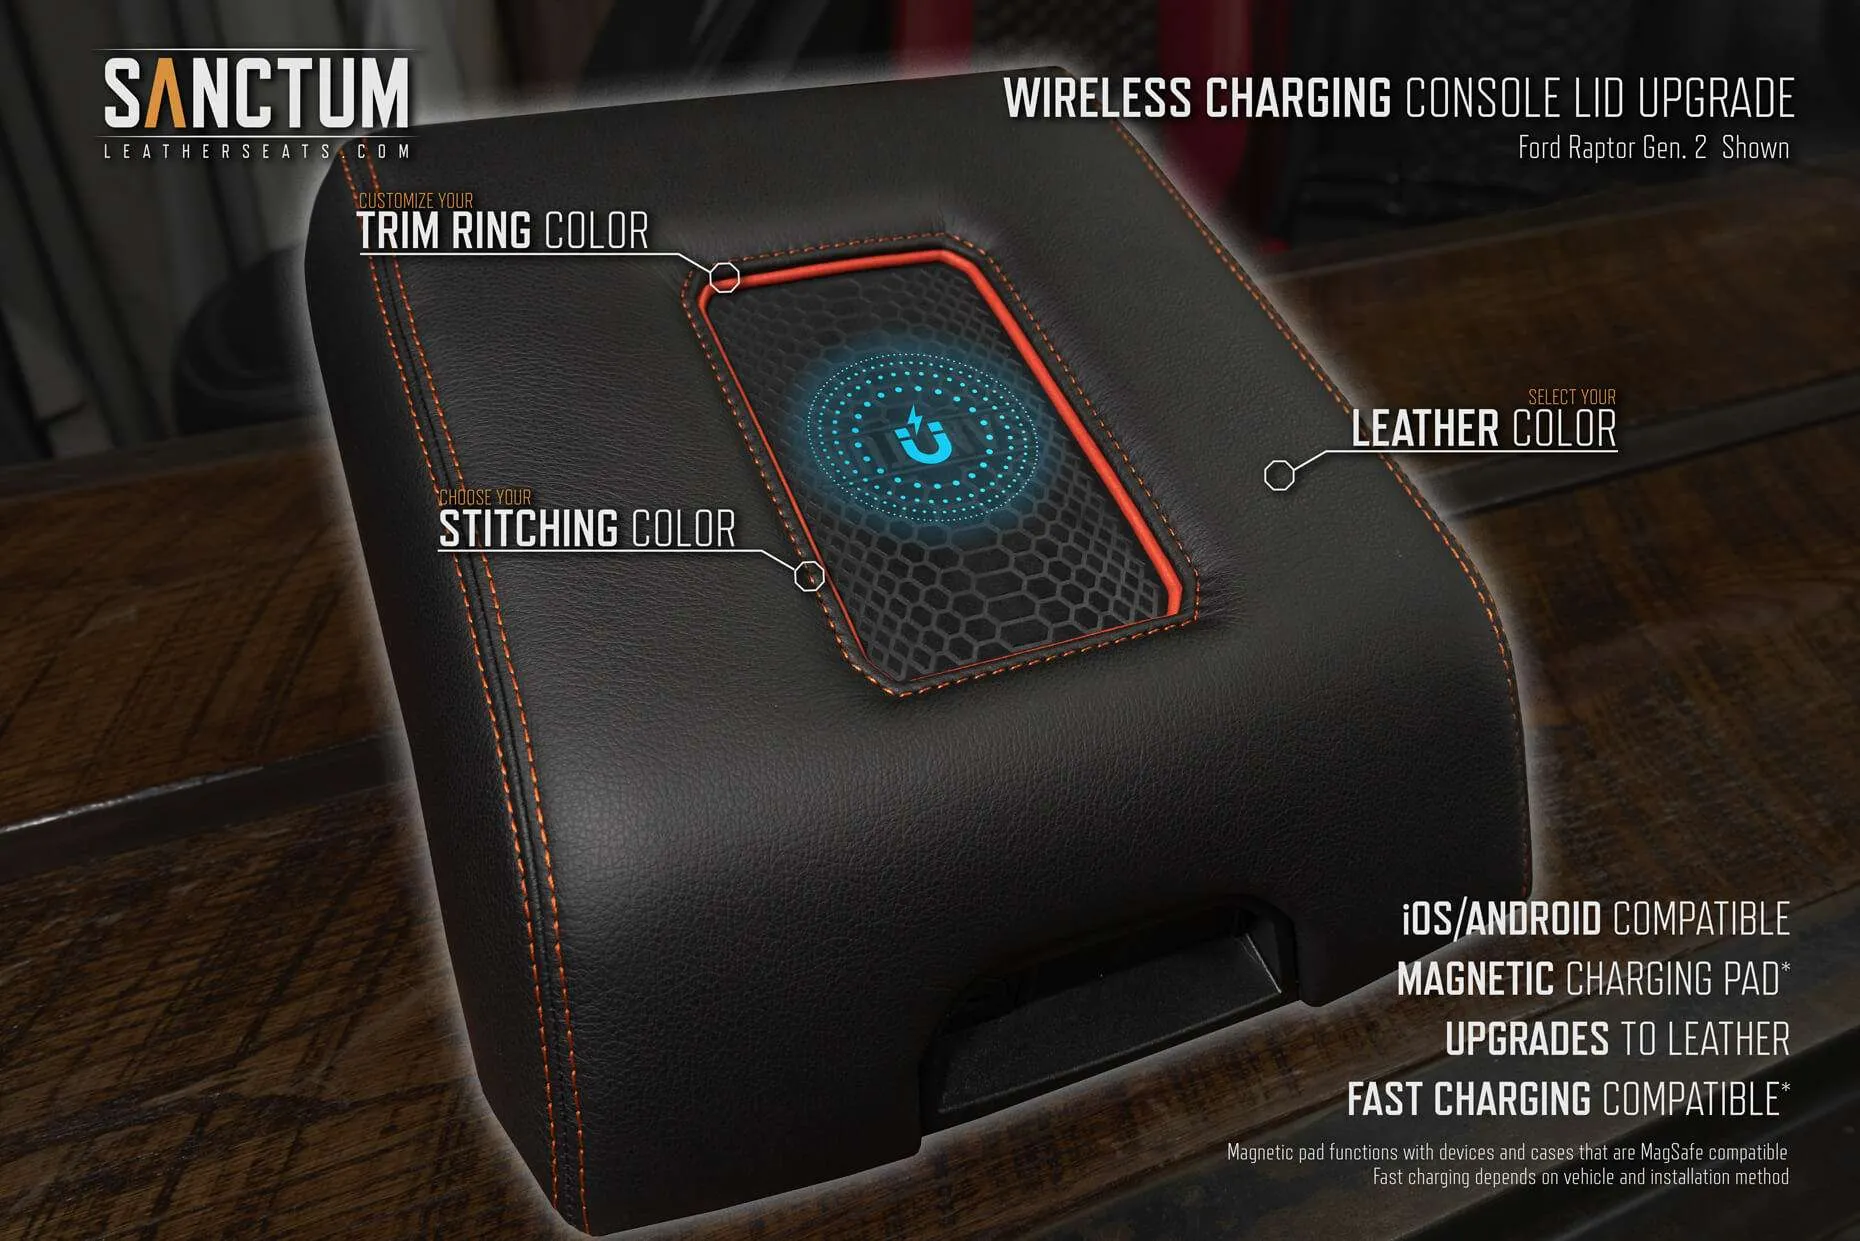 Ford Raptor 2nd Generation Sanctum Wireless Charging Console Features